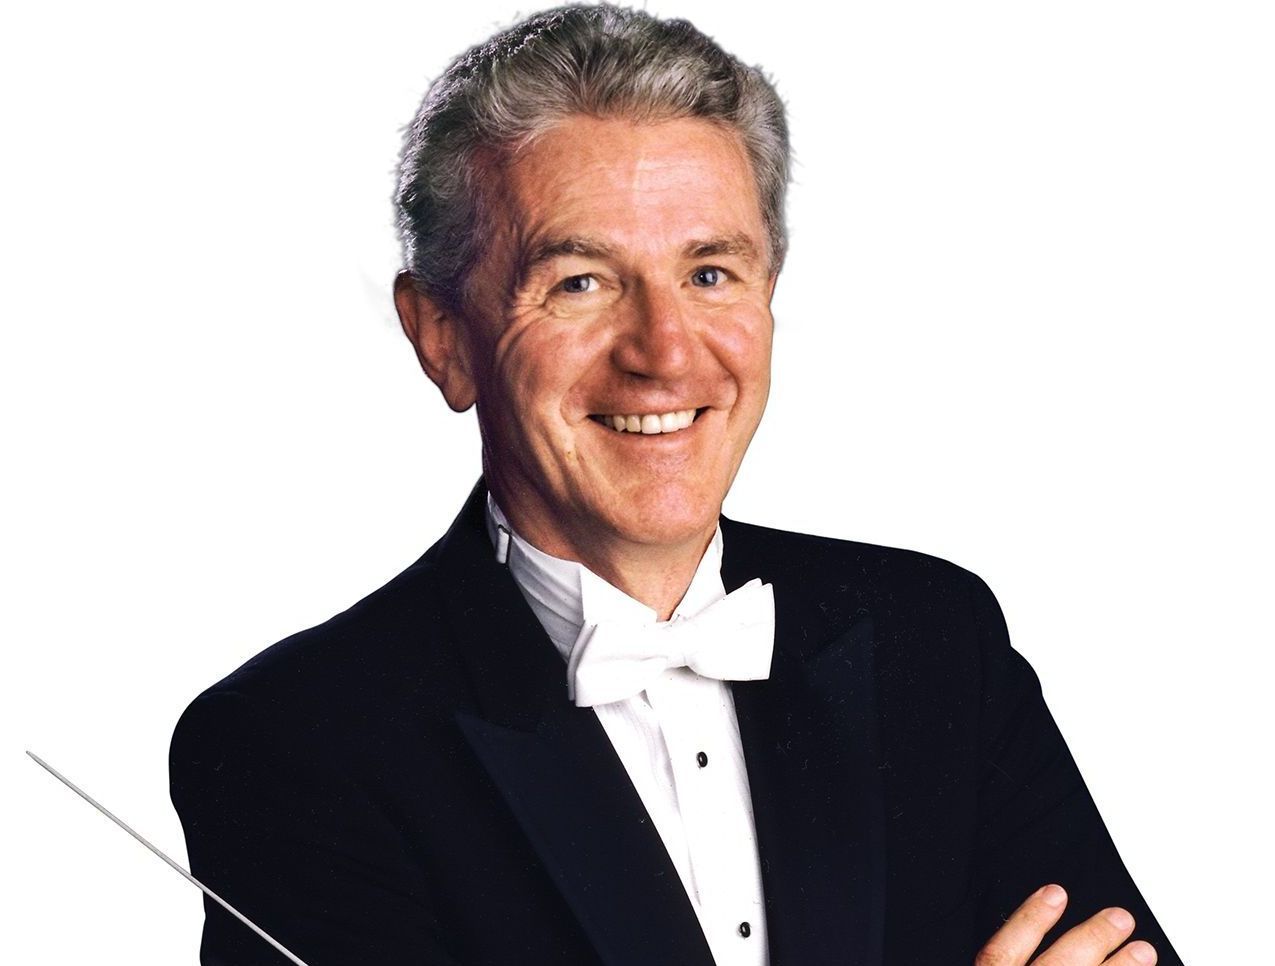 A man in a tuxedo and bow tie is smiling with his arms crossed